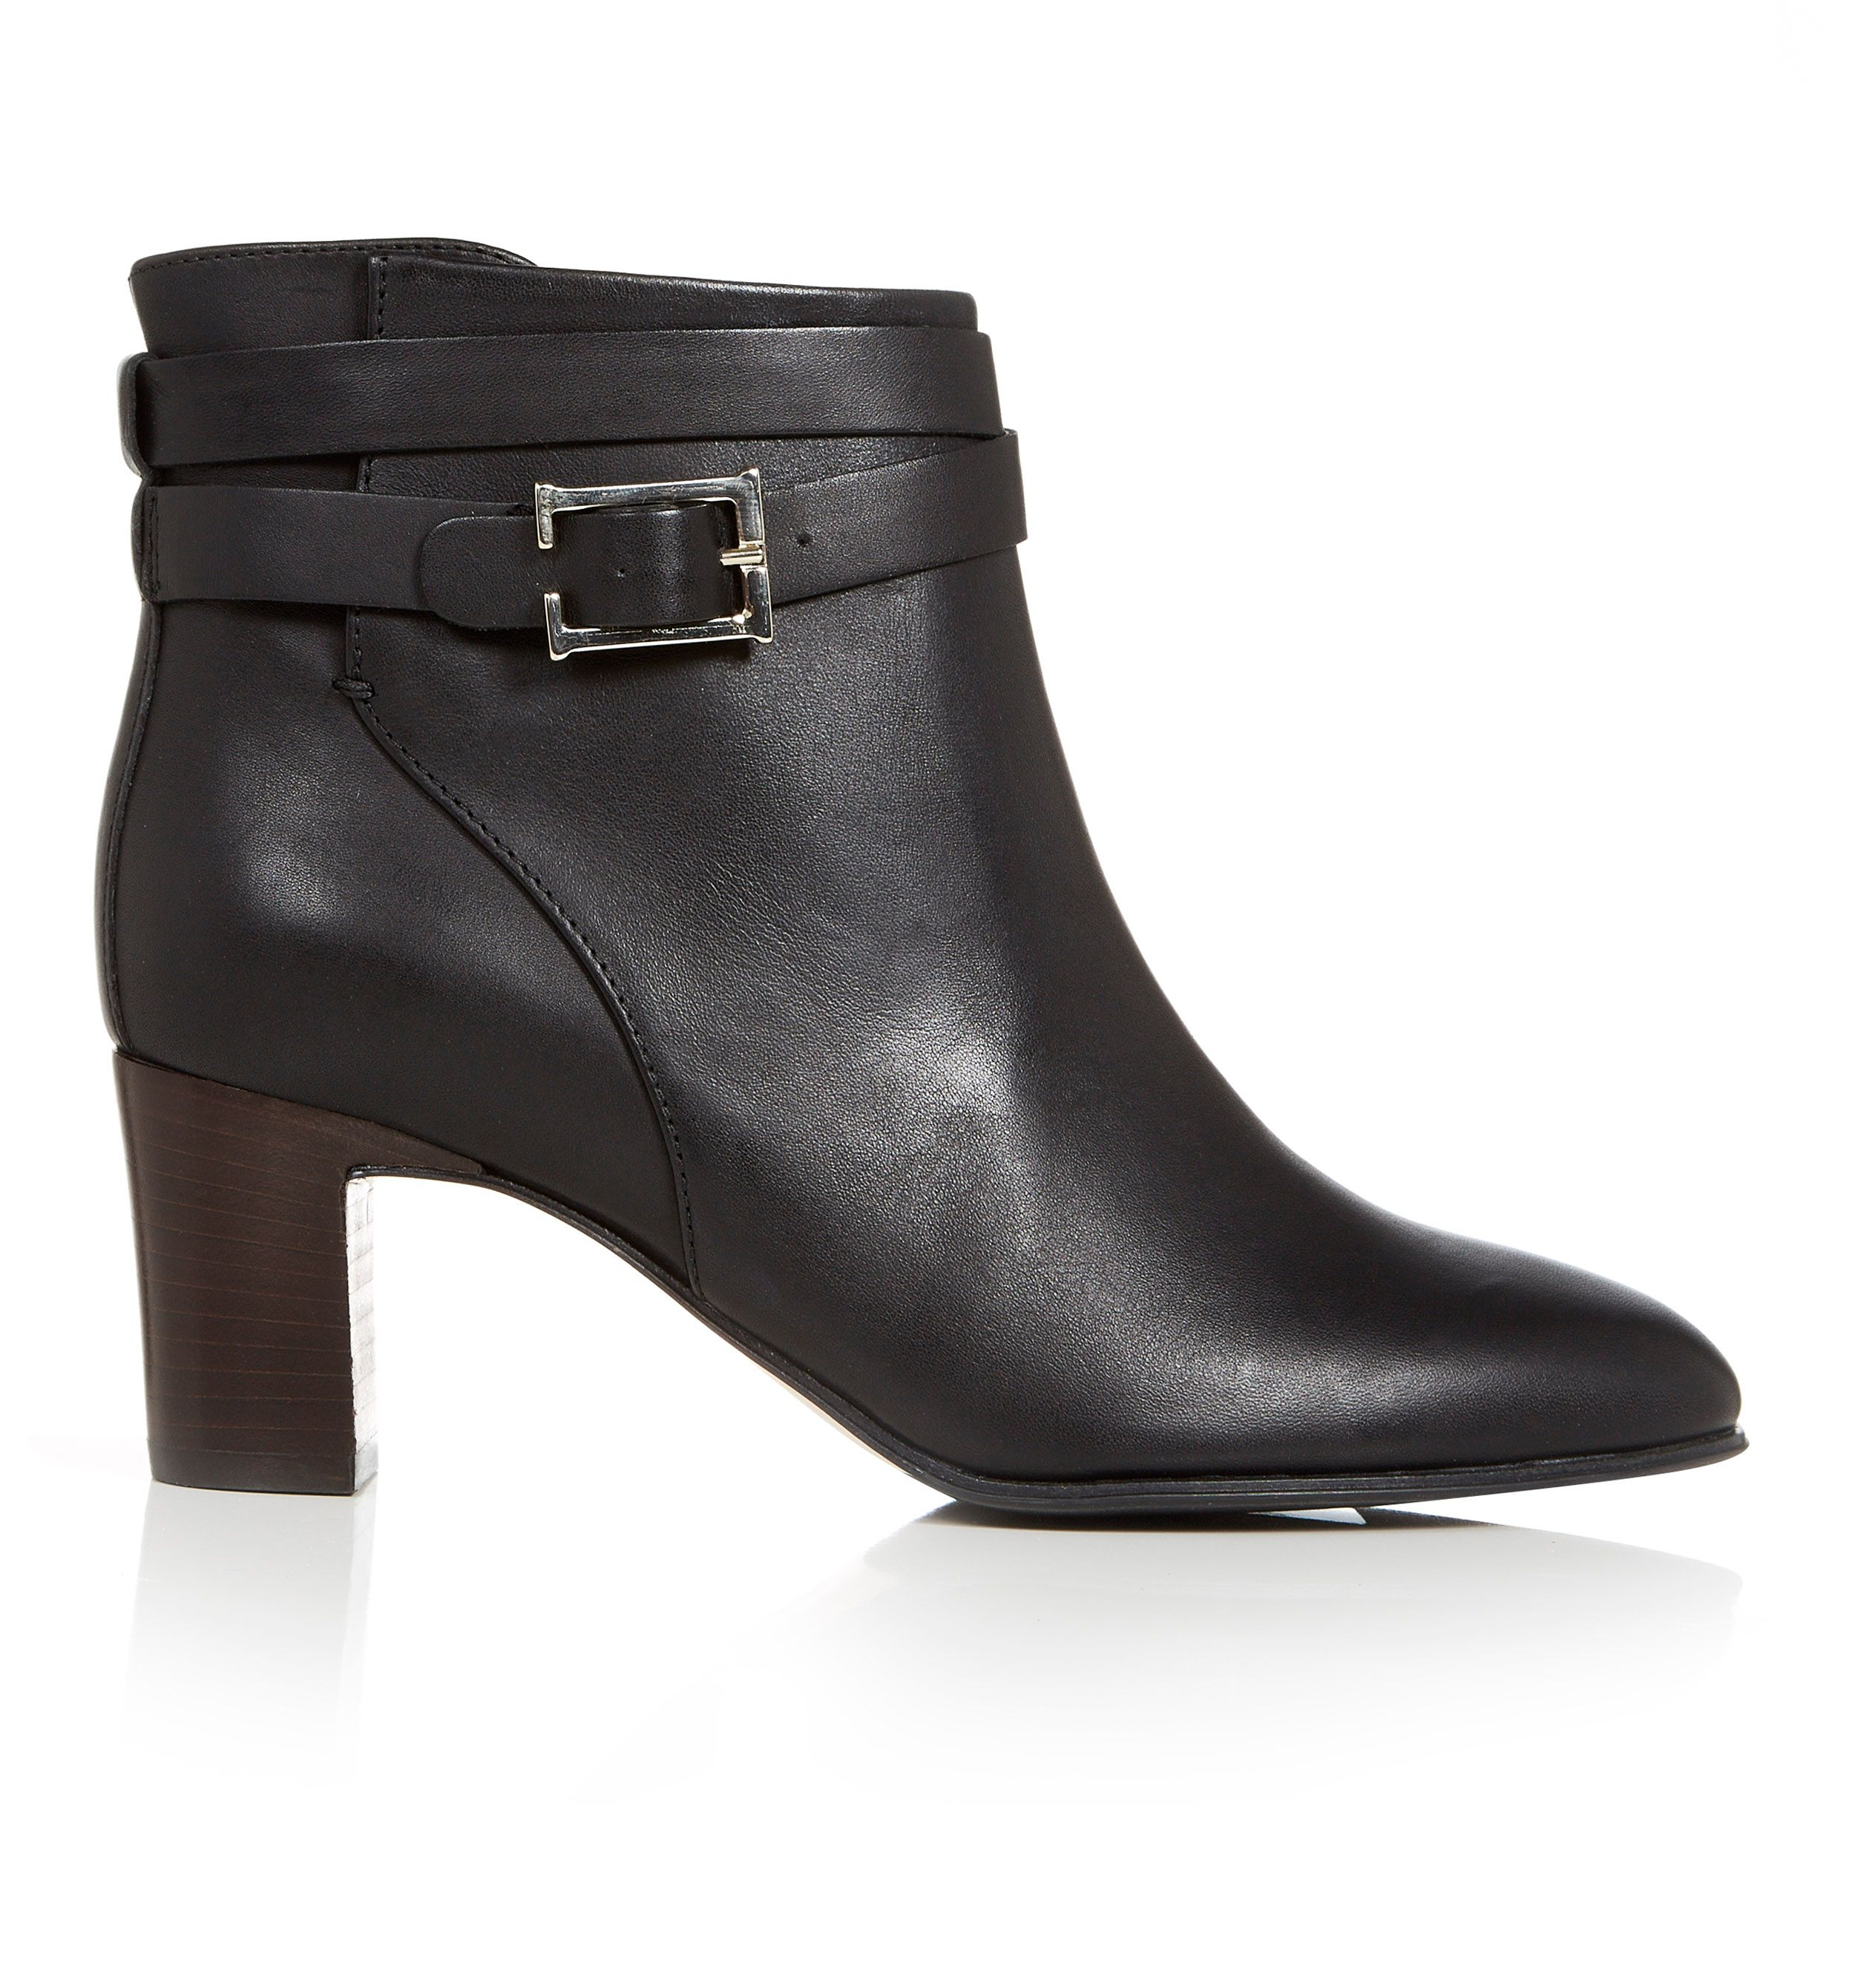 Hobbs Cleo Ankle Boot in Black | Lyst